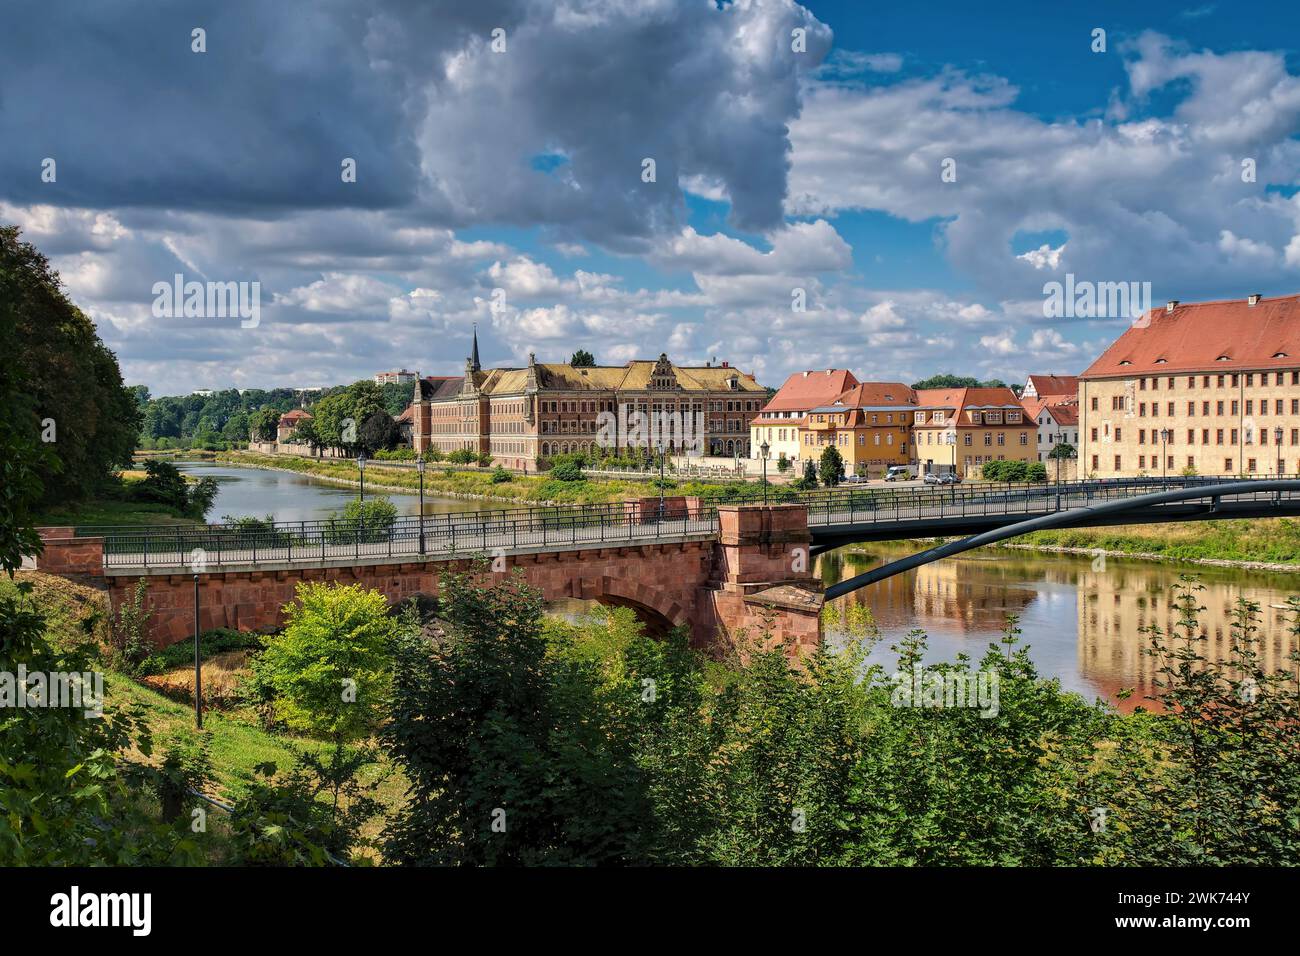 Grimma a small town in Saxony, Germany Stock Photo